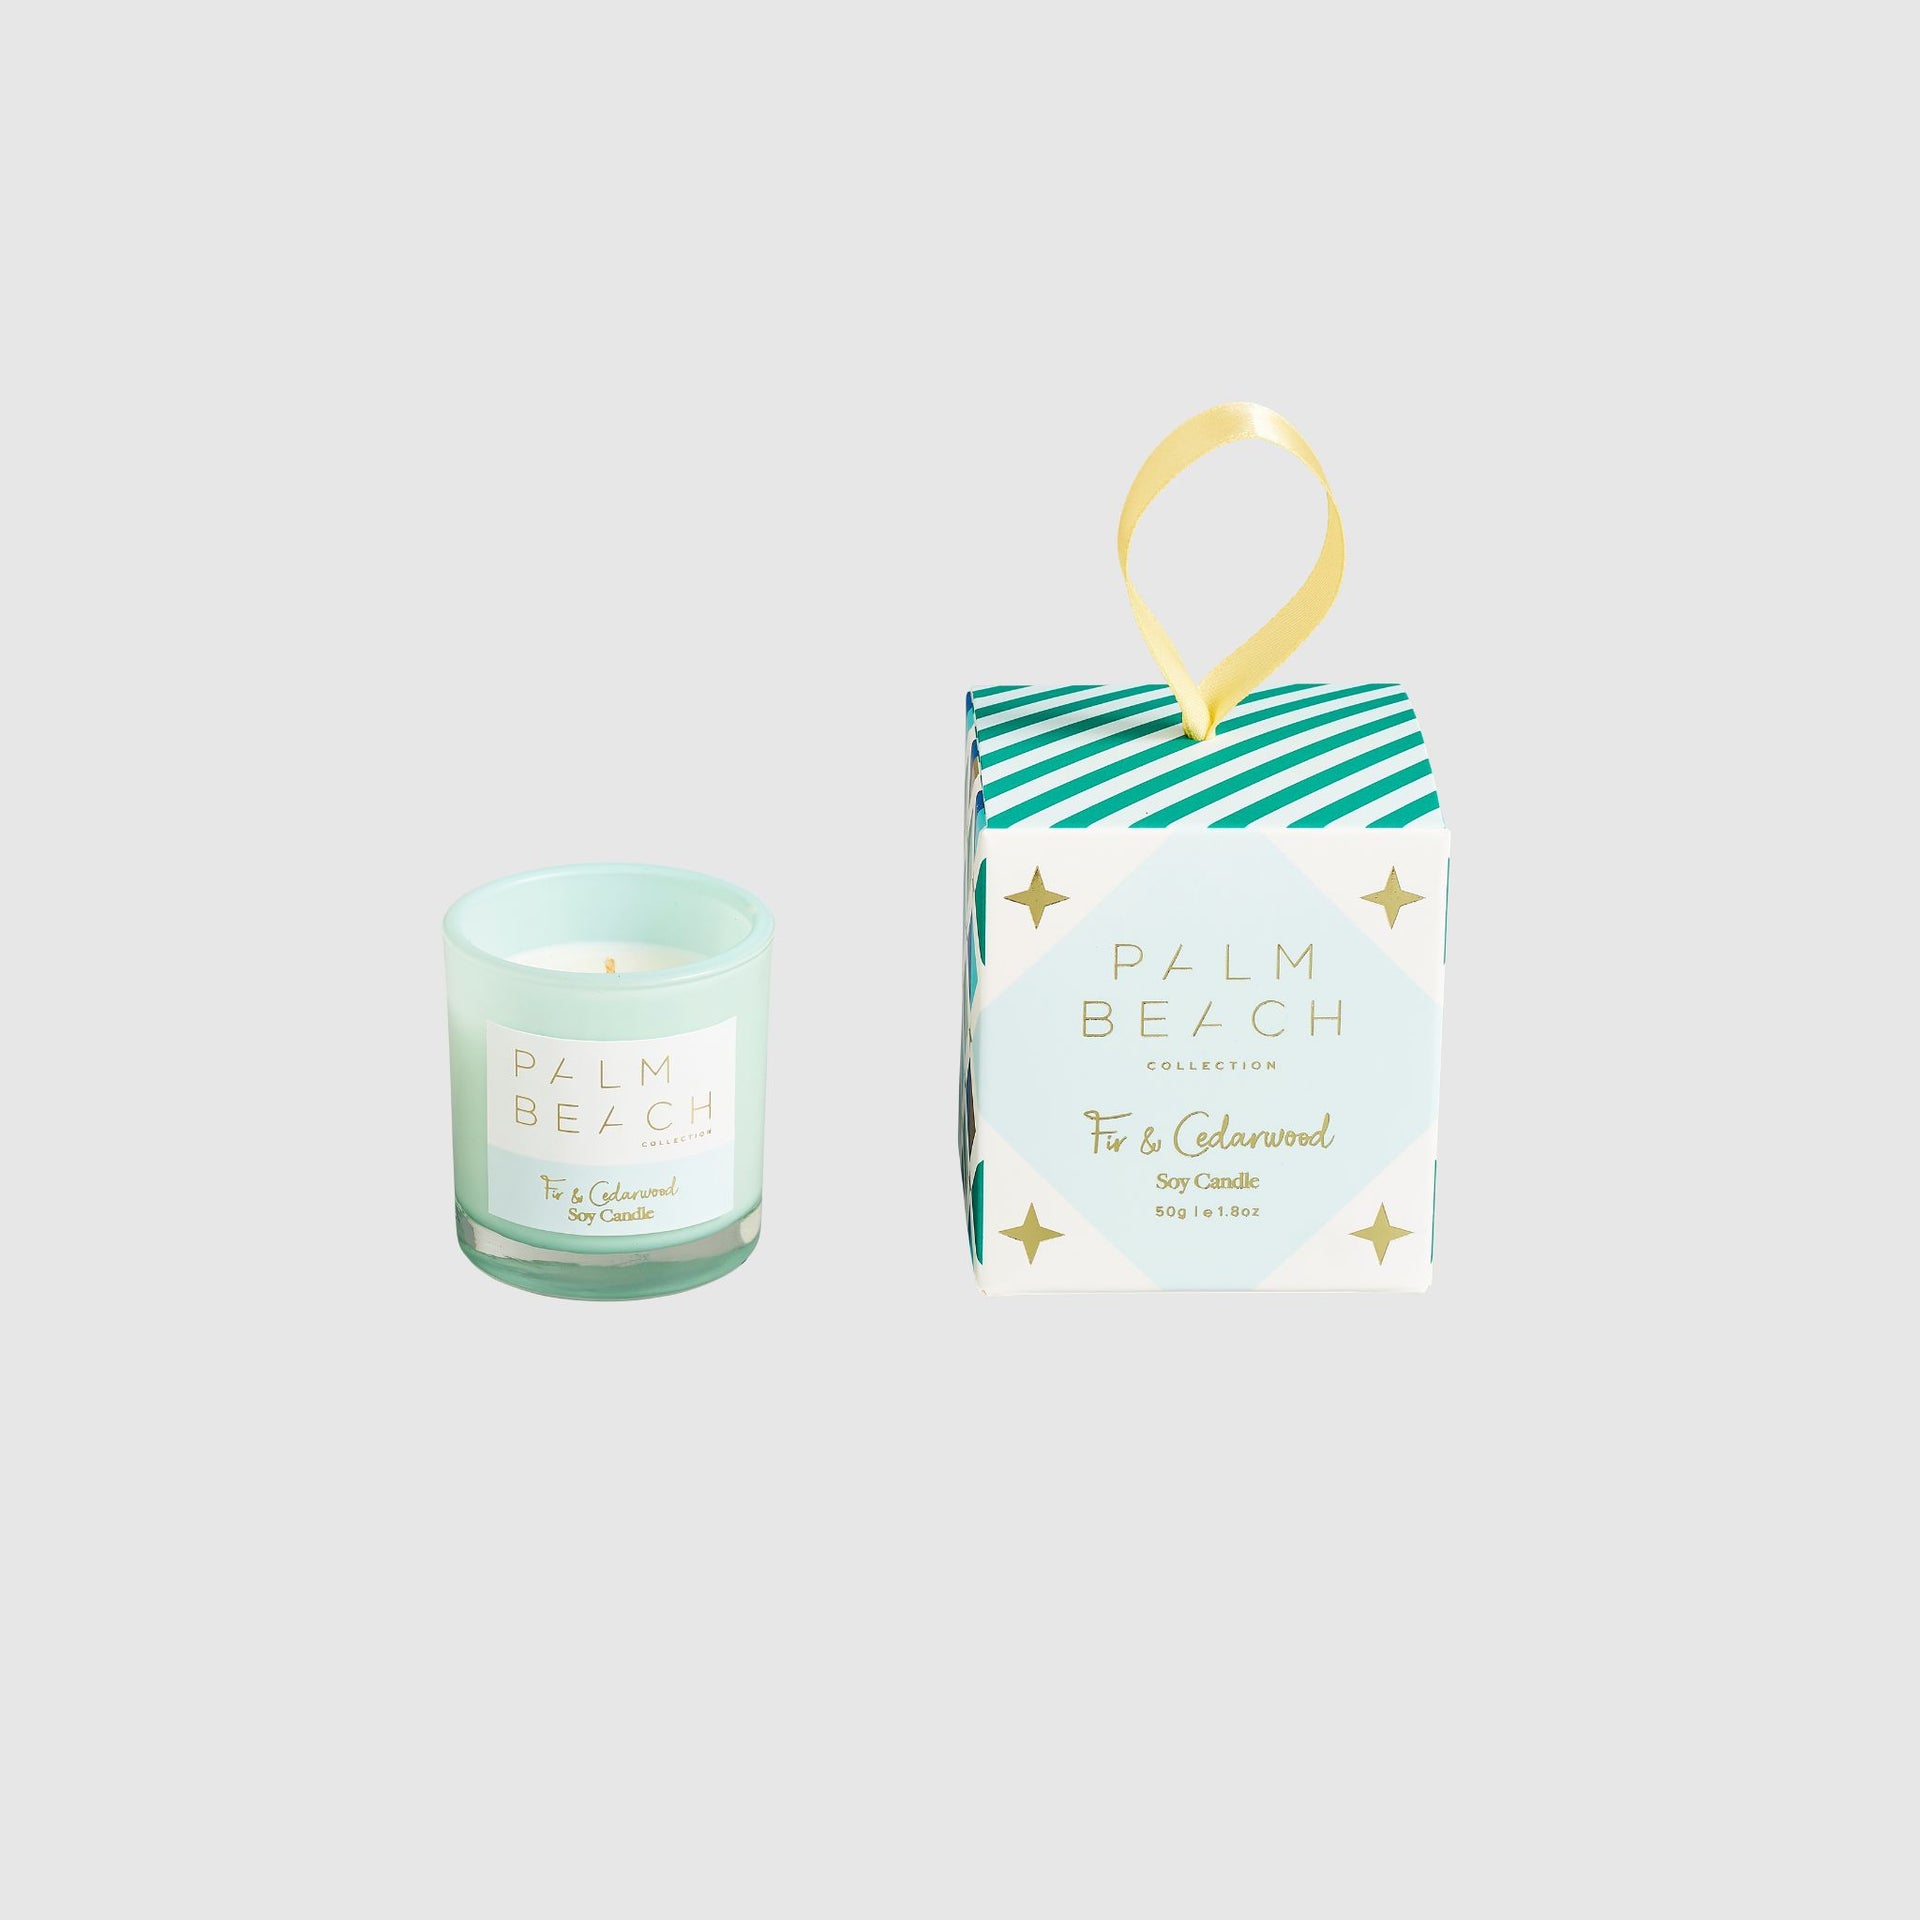 Fir & Cedarwood <br> Hanging Bauble <br> 50g Extra Mini Candle